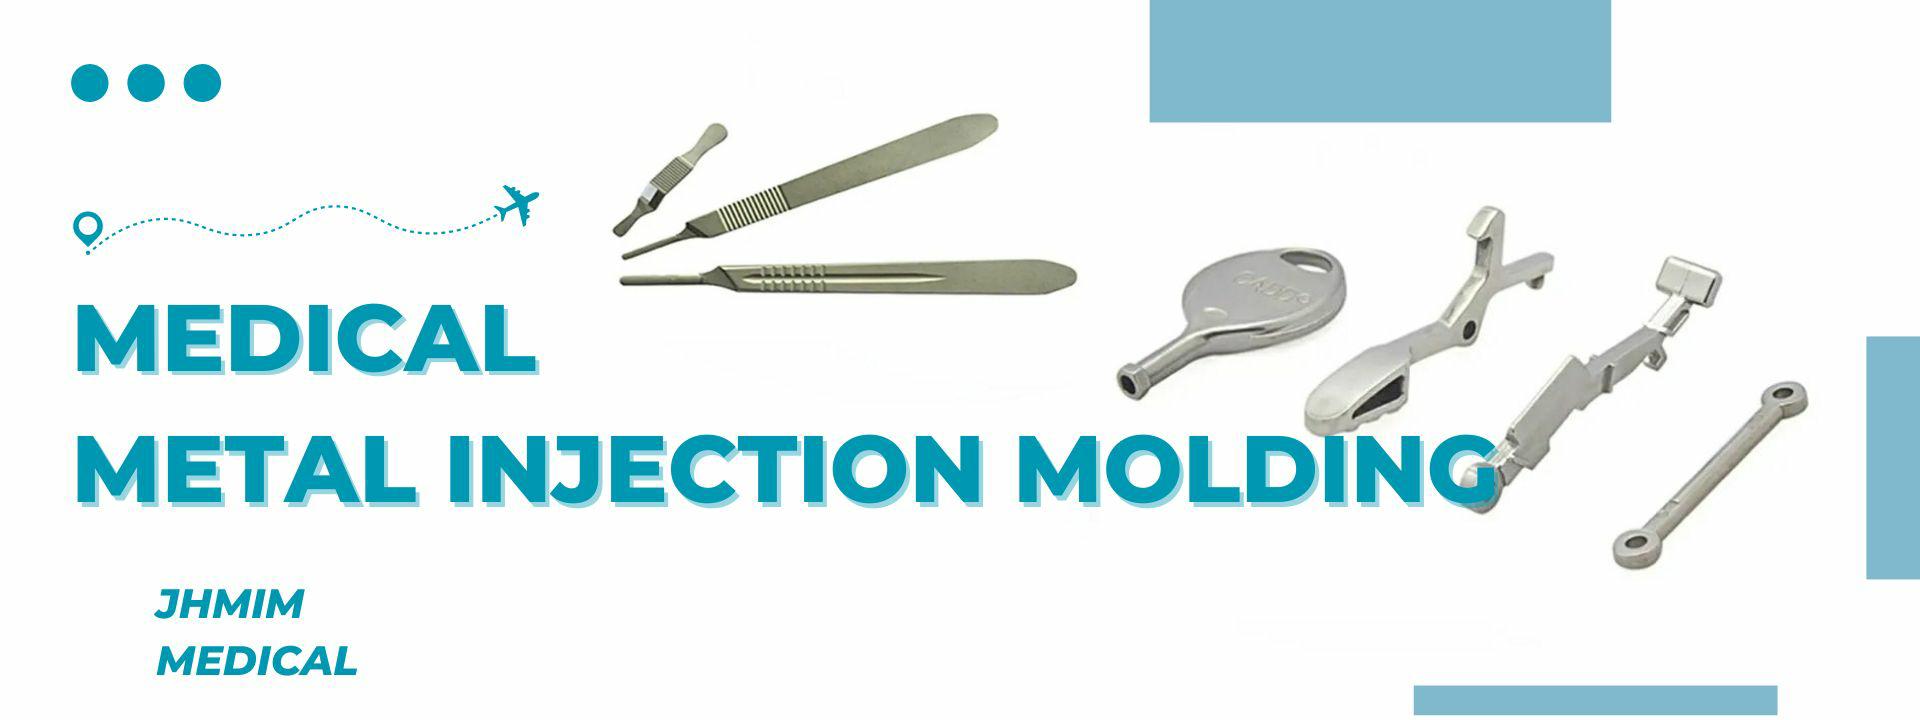 medical metal injection molding